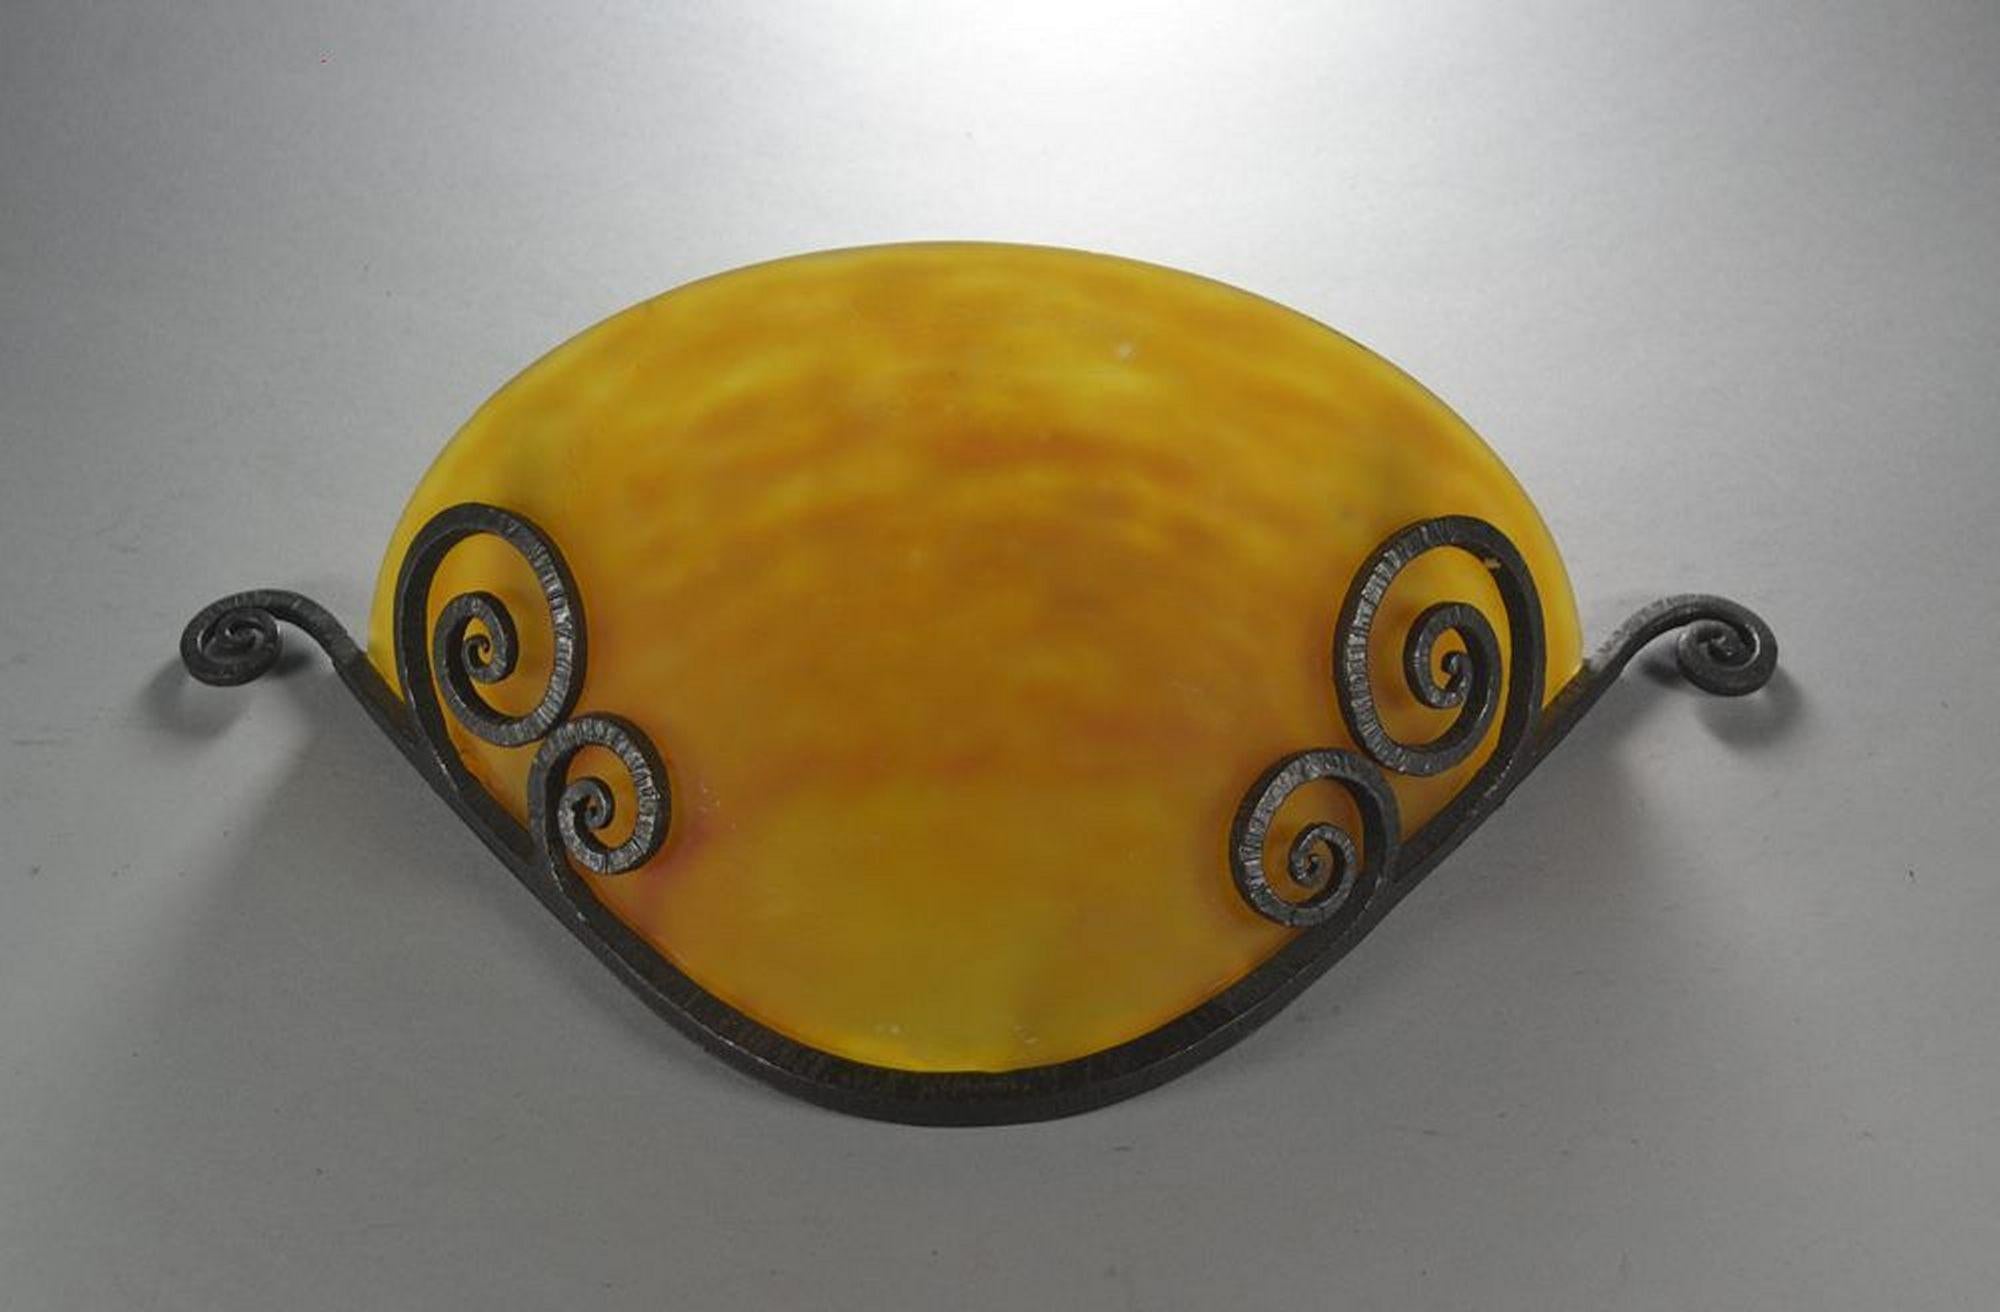 Edgar Brandt and Daum Nancy wall sconce.
Wrought iron fixture stamped with normal signature E. BRANDT.
Glass part signed DAUM Nancy.
Circa 1910.
Fixture excellent condition.
Glass with few small chips on edges not visible when in